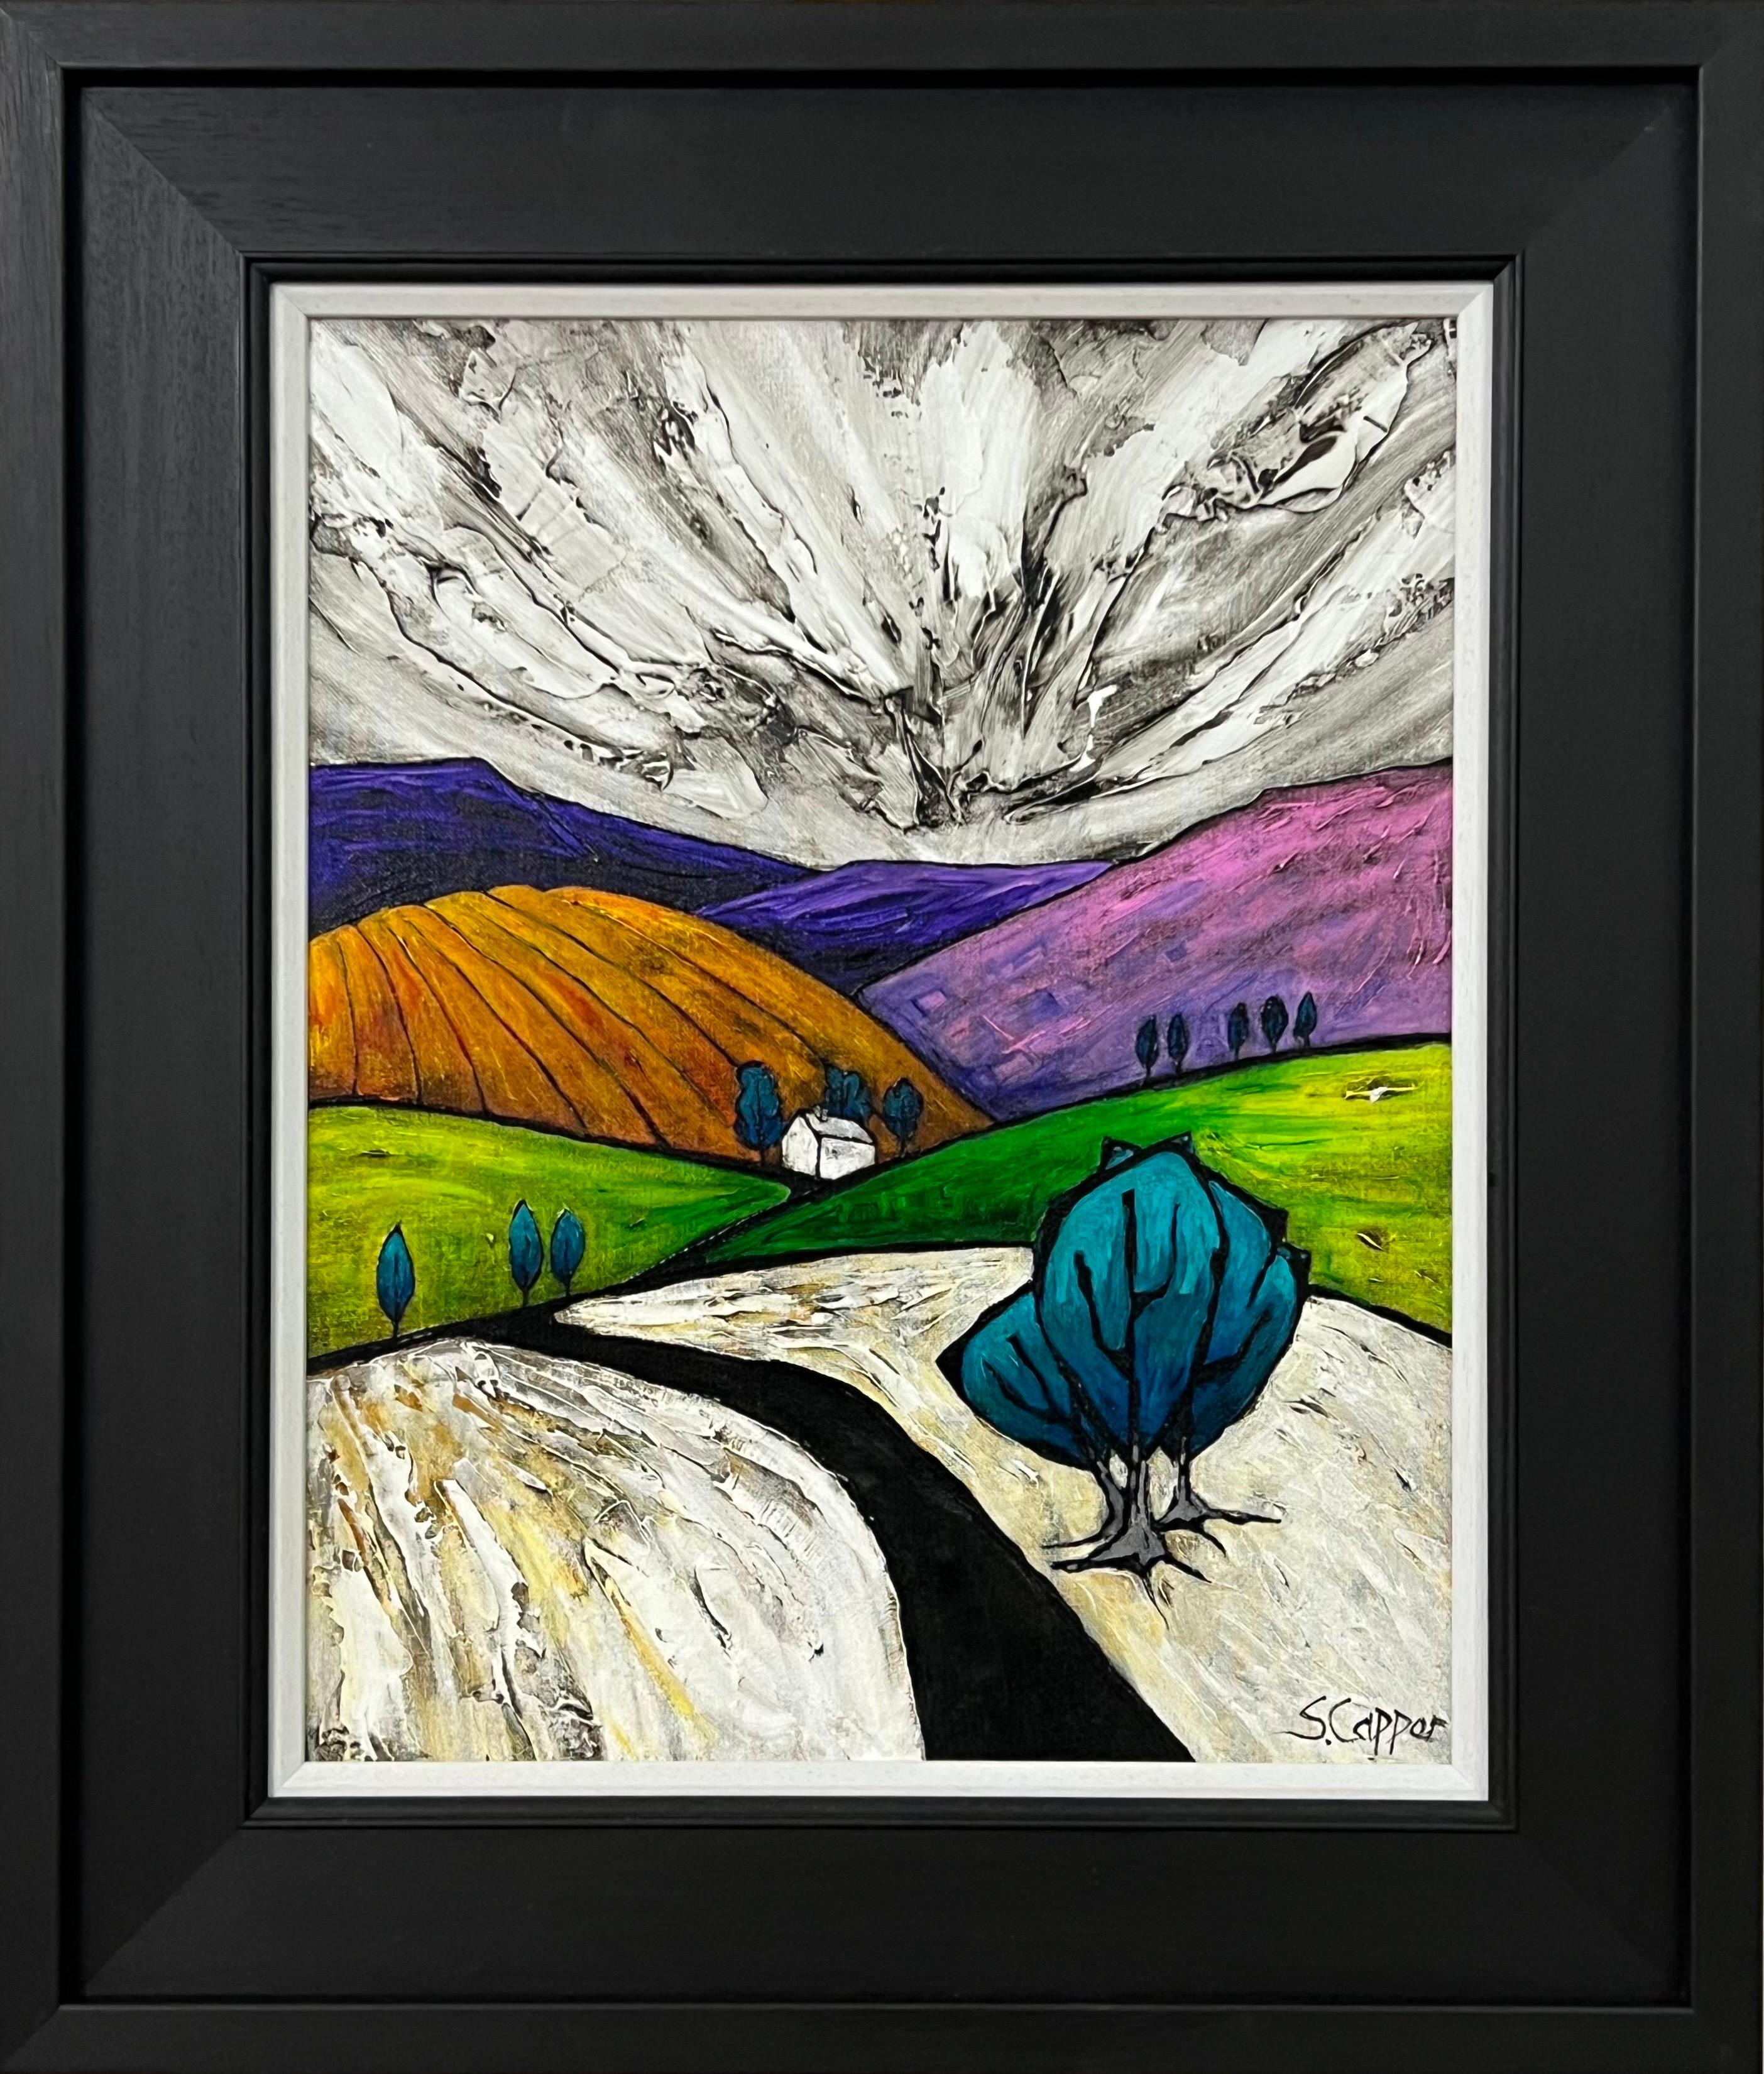 Steve Capper Abstract Painting - Abstract Landscape Painting entitled Pink Hill by Cubist Fauvist British Artist